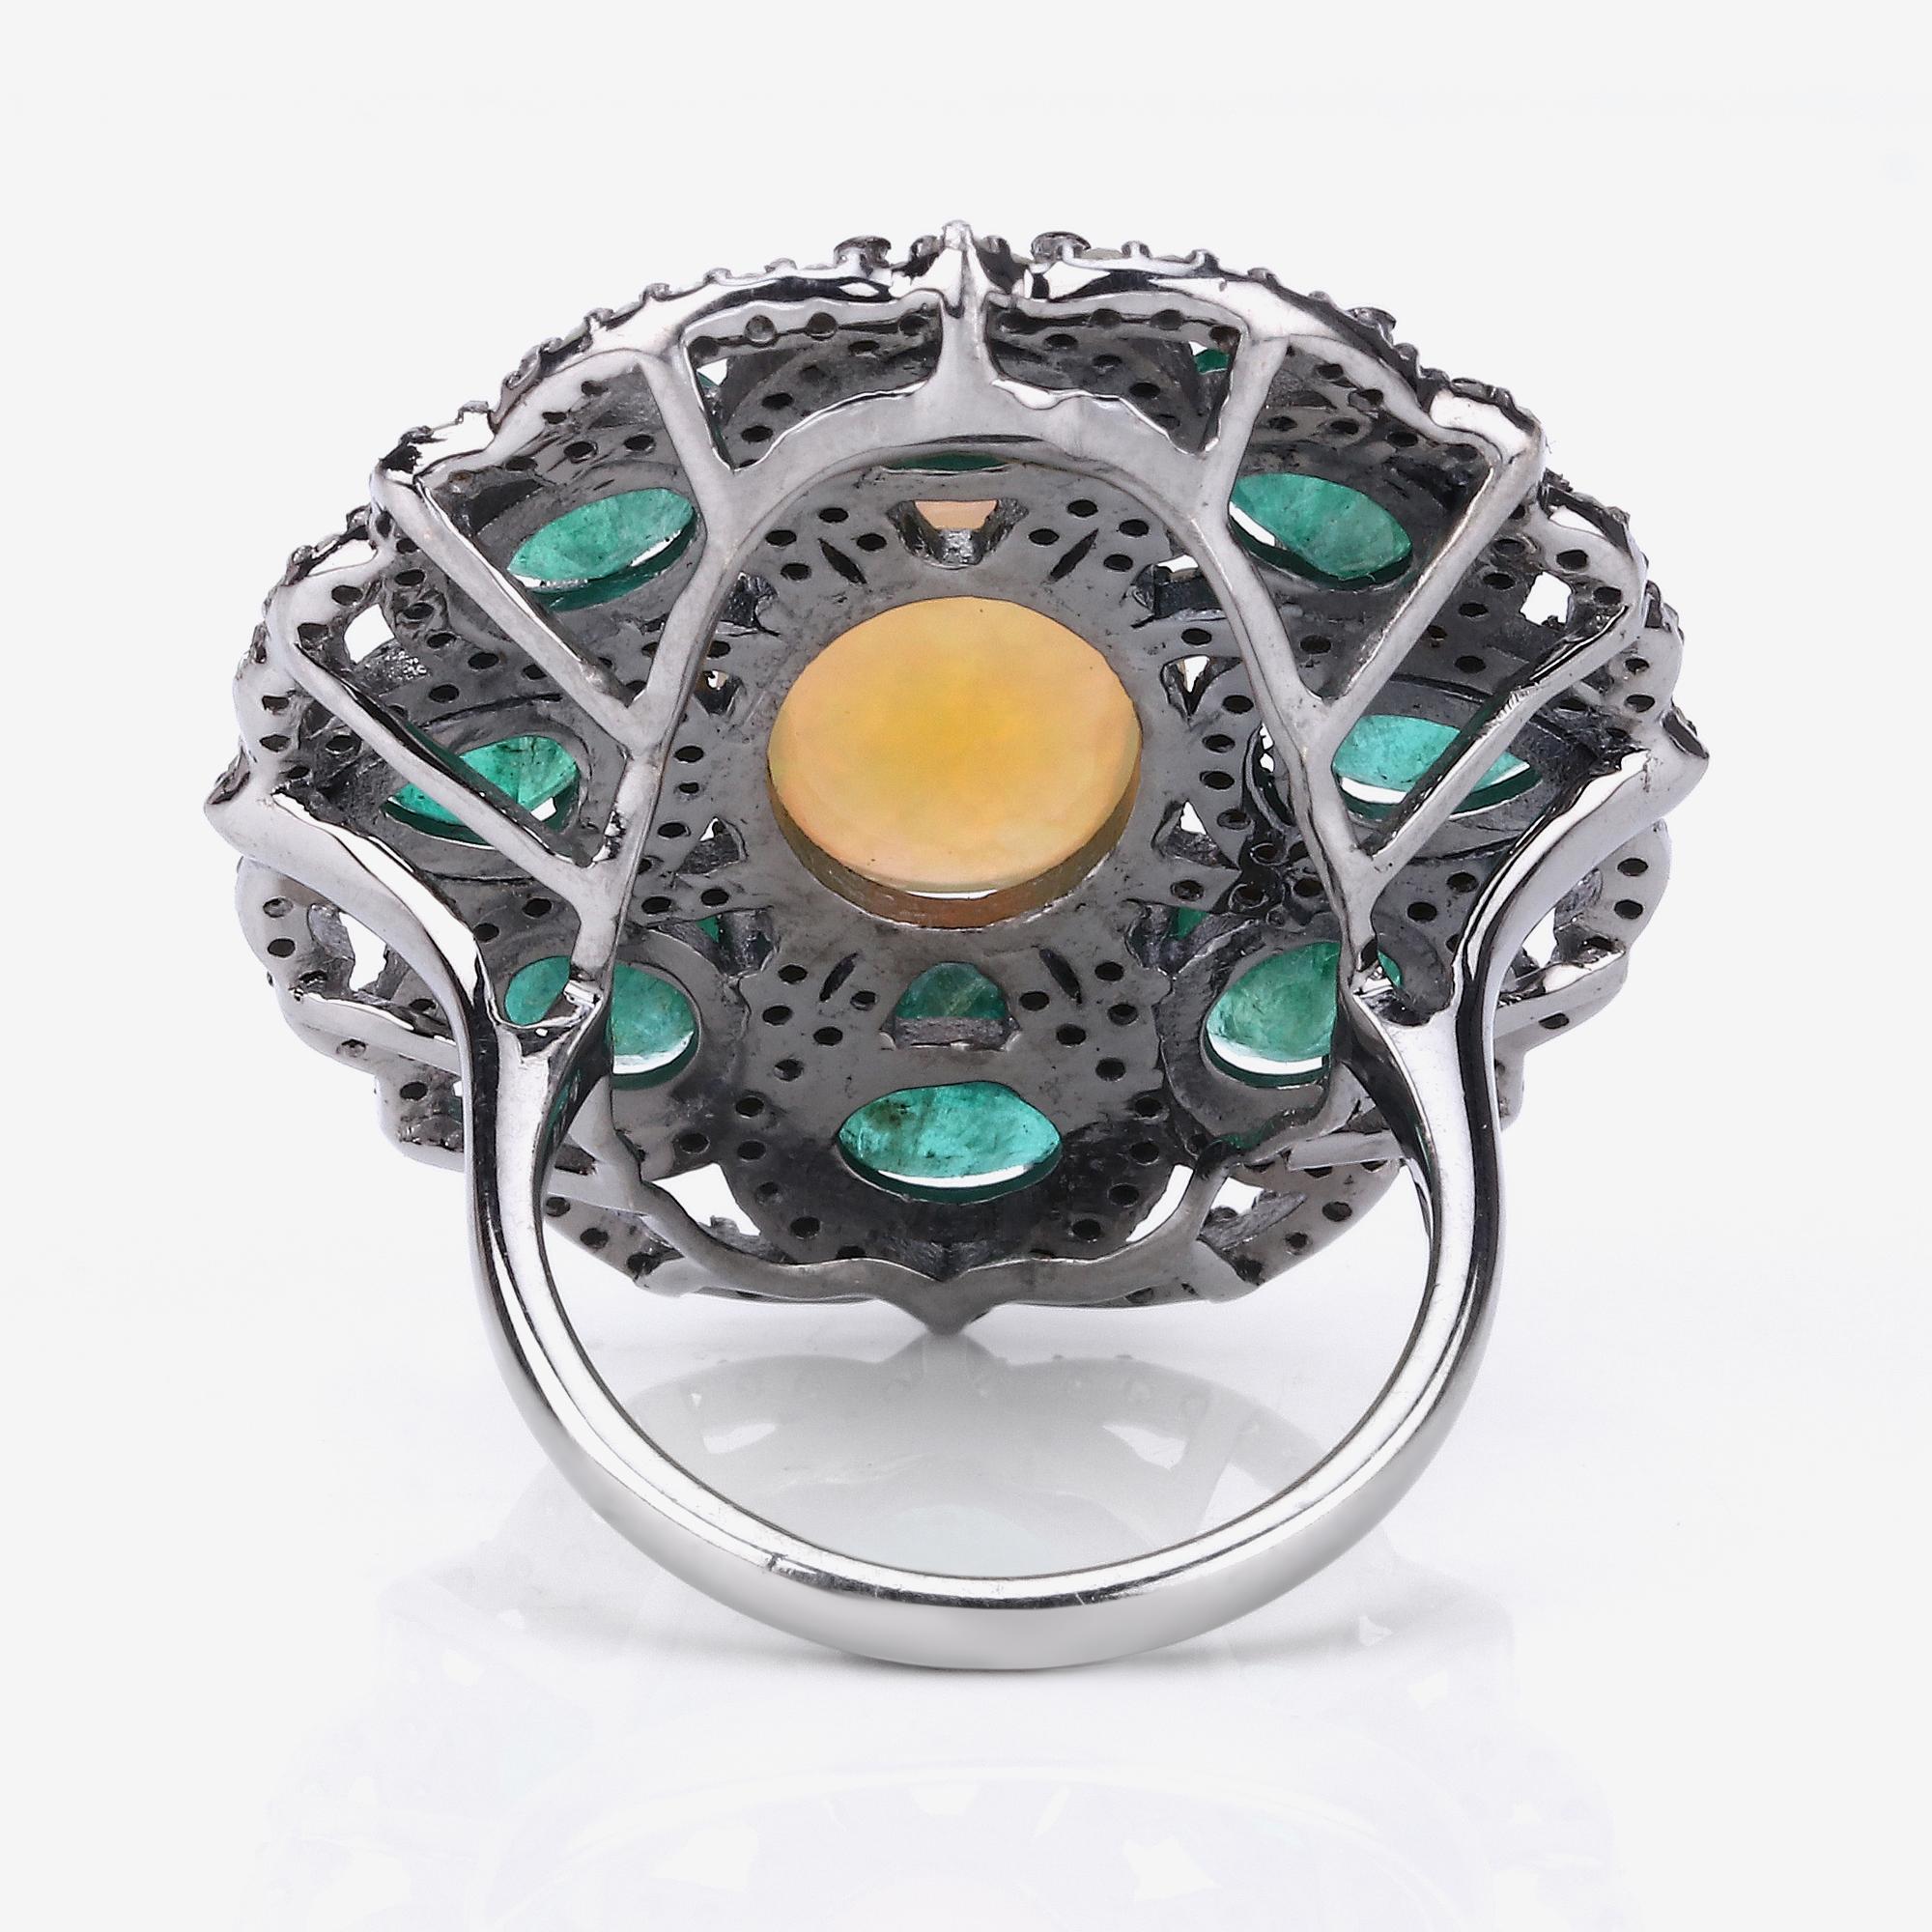 9.80cttw Ethiopian Opal, Emerald with Diamonds 1.31cttw Sterling Silver Ring

This eye-catching ring shows off an eclectic gemstone mix worth fawning over! Featuring multi-color gemstones of emerald, rainbow opal having 9.80 ct. tot. gem wt. along